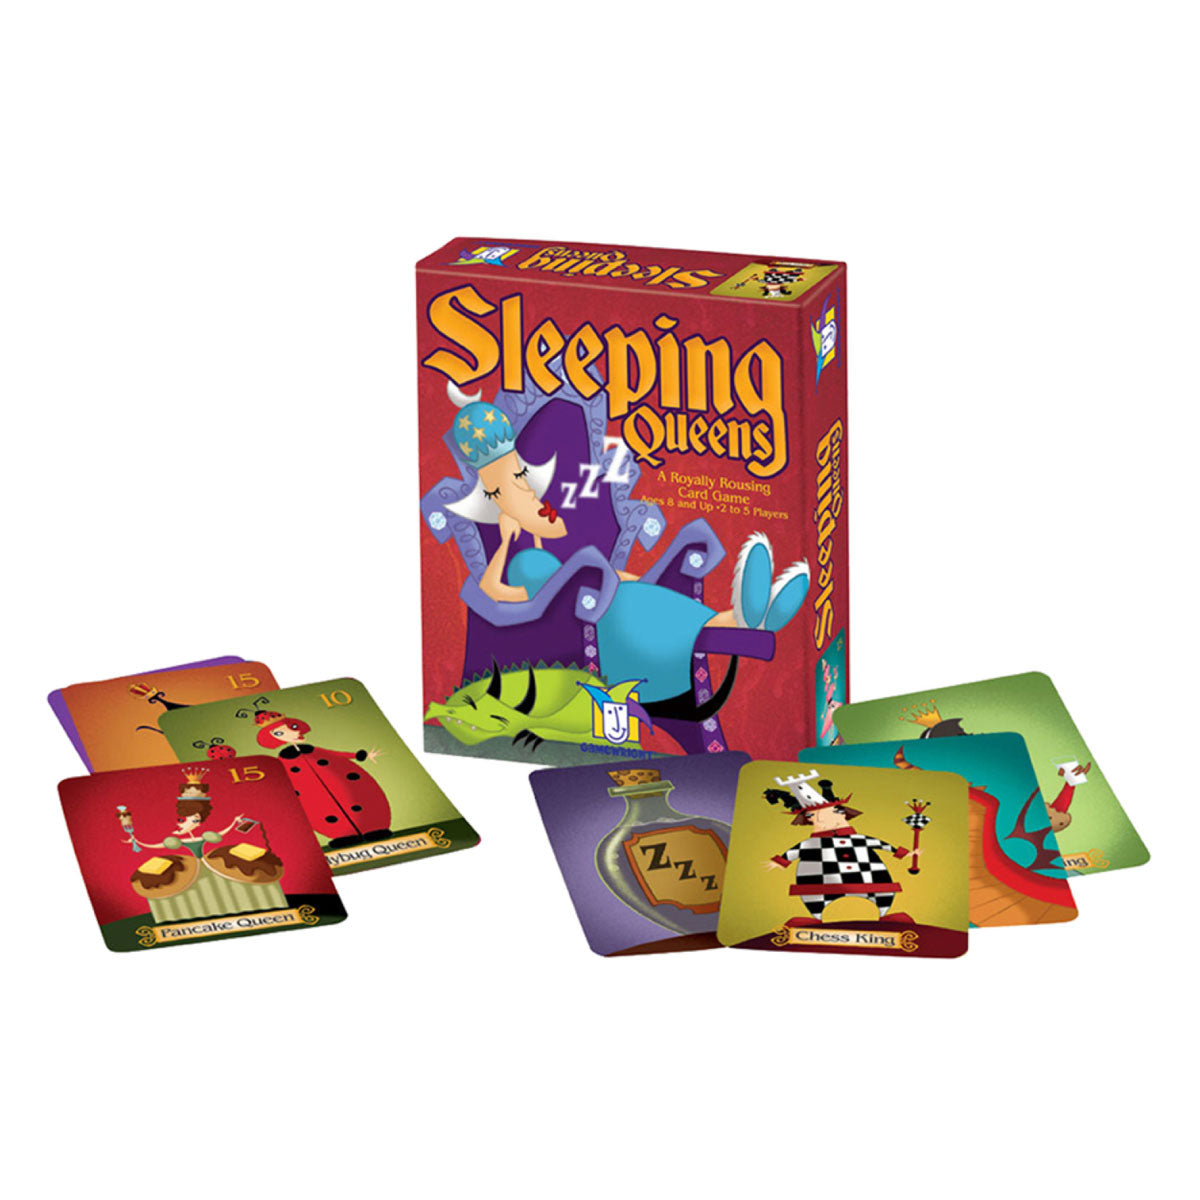 Sleeping Queens Card Game from Gamewright